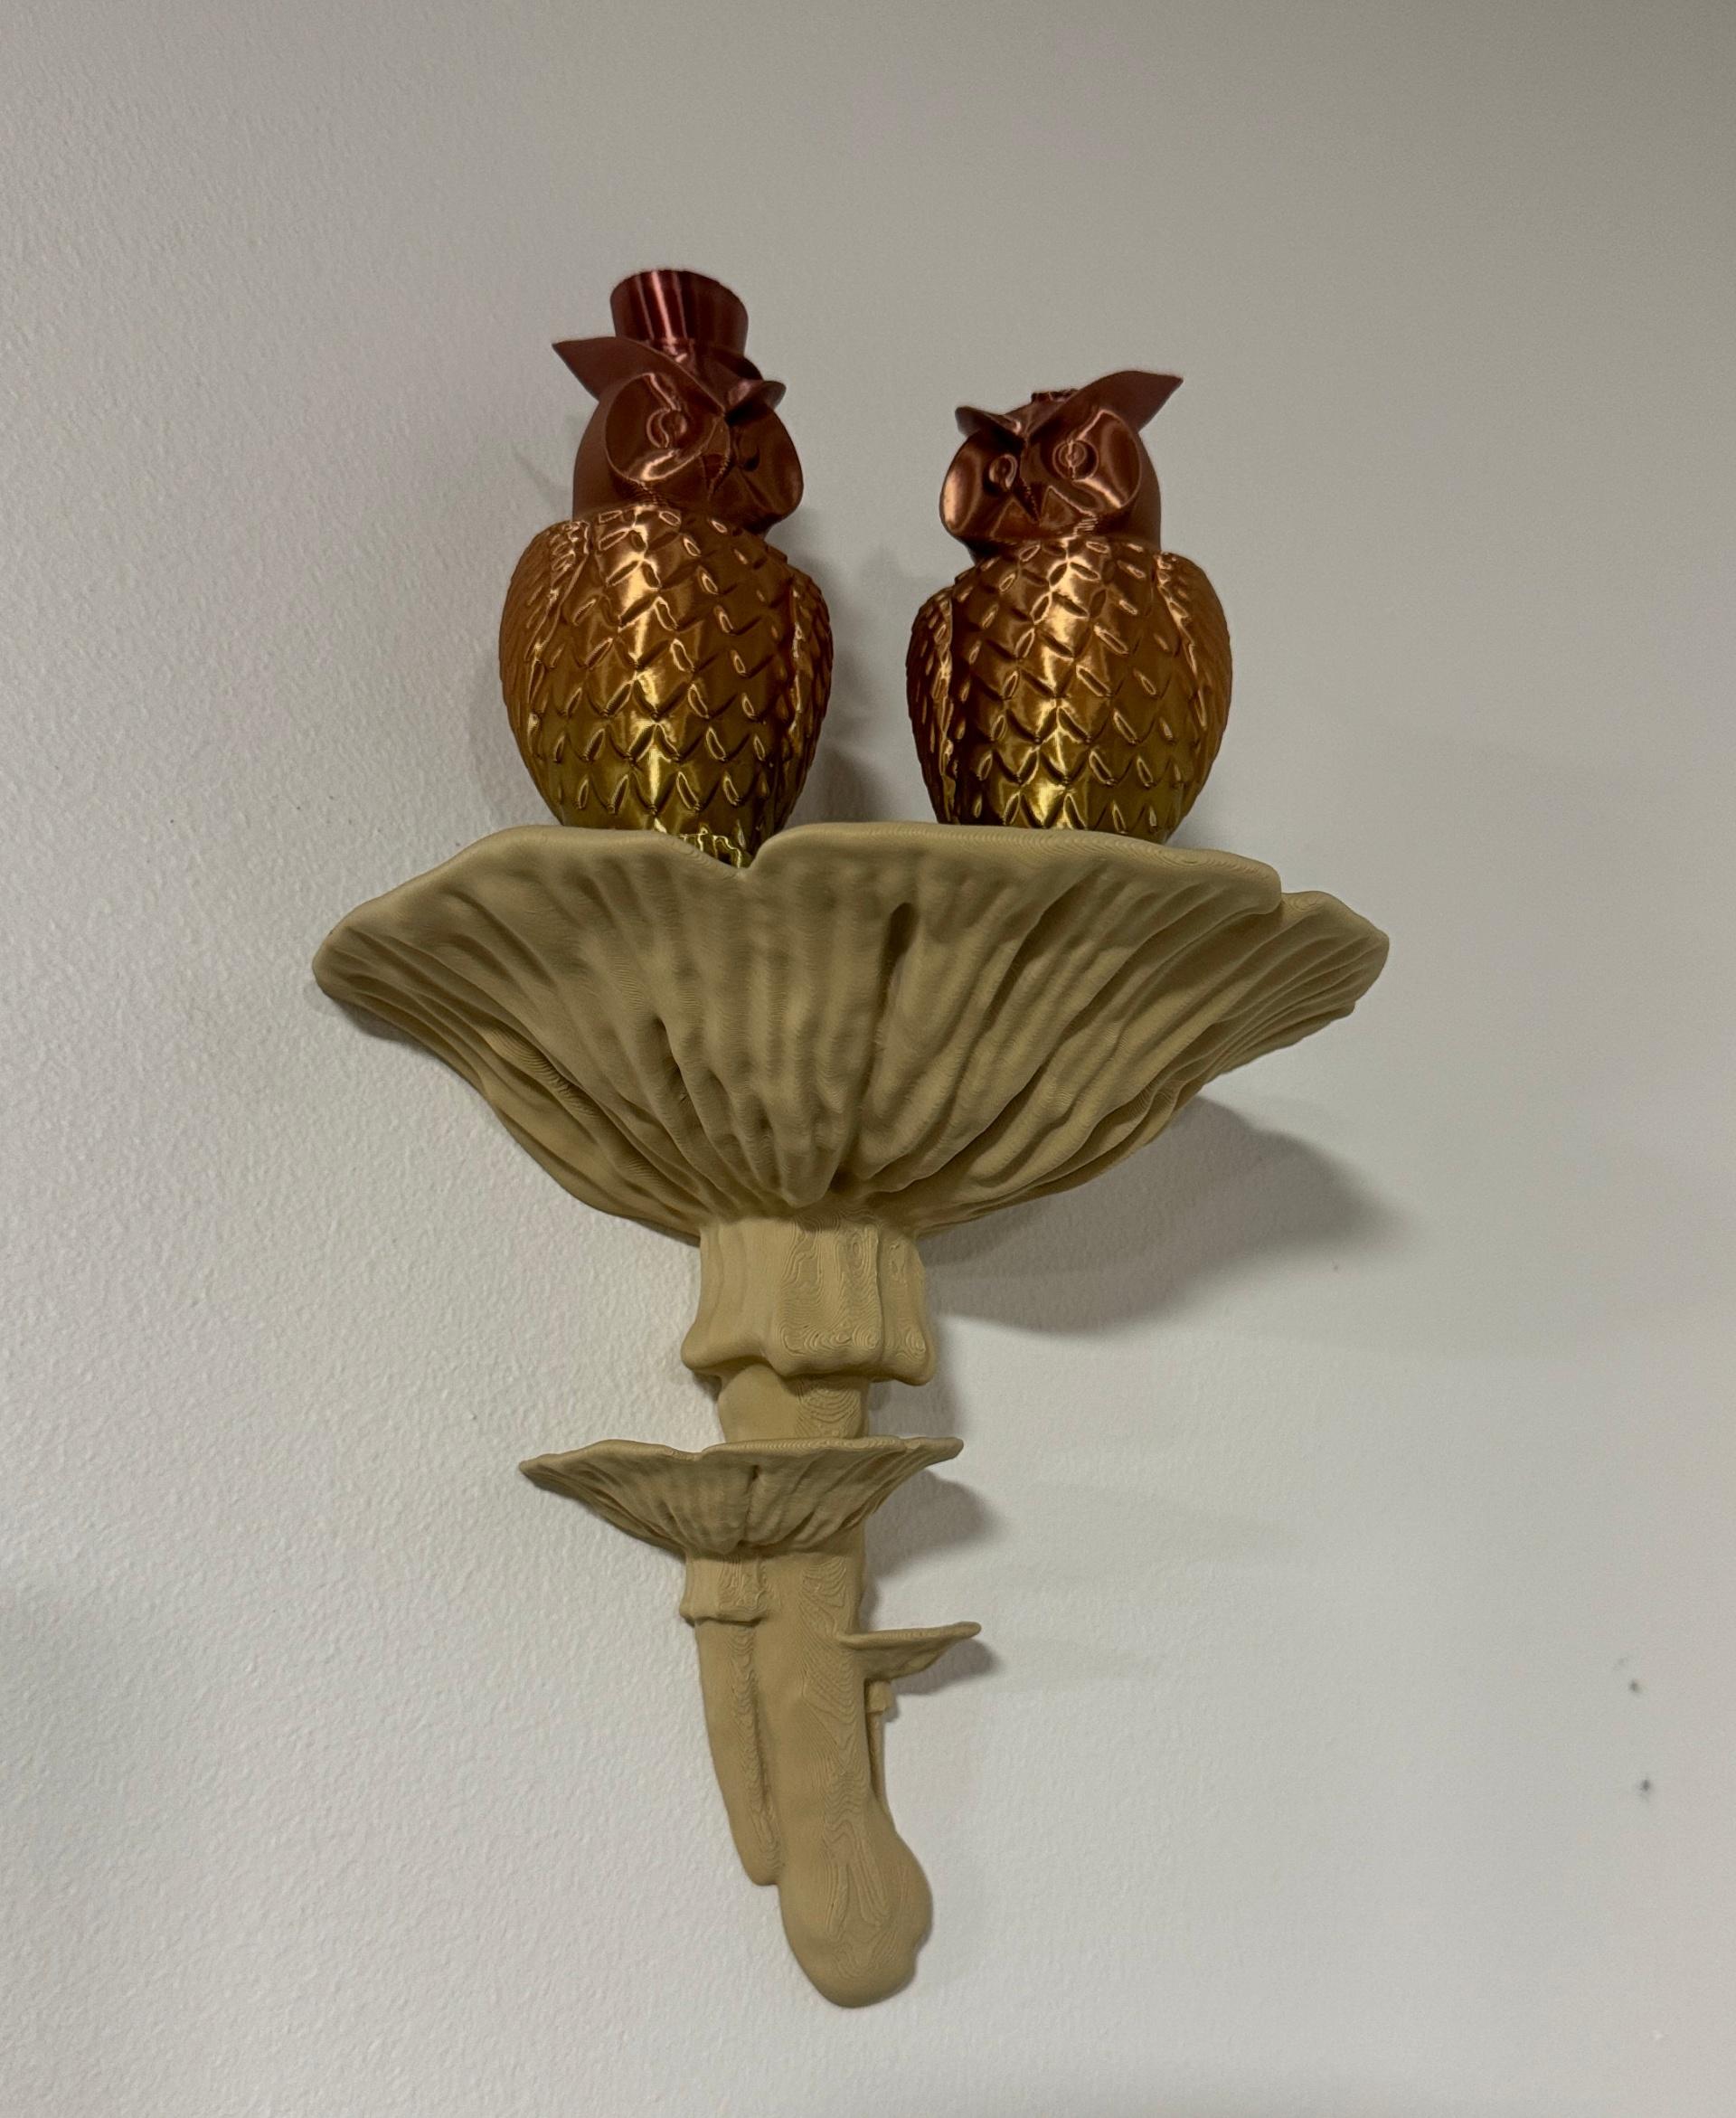 Wall shelf “Amanita Fungus” - Very nice model. The print came out wonderful and the bracket is perfect. Thank you for sharing your art! - 3d model